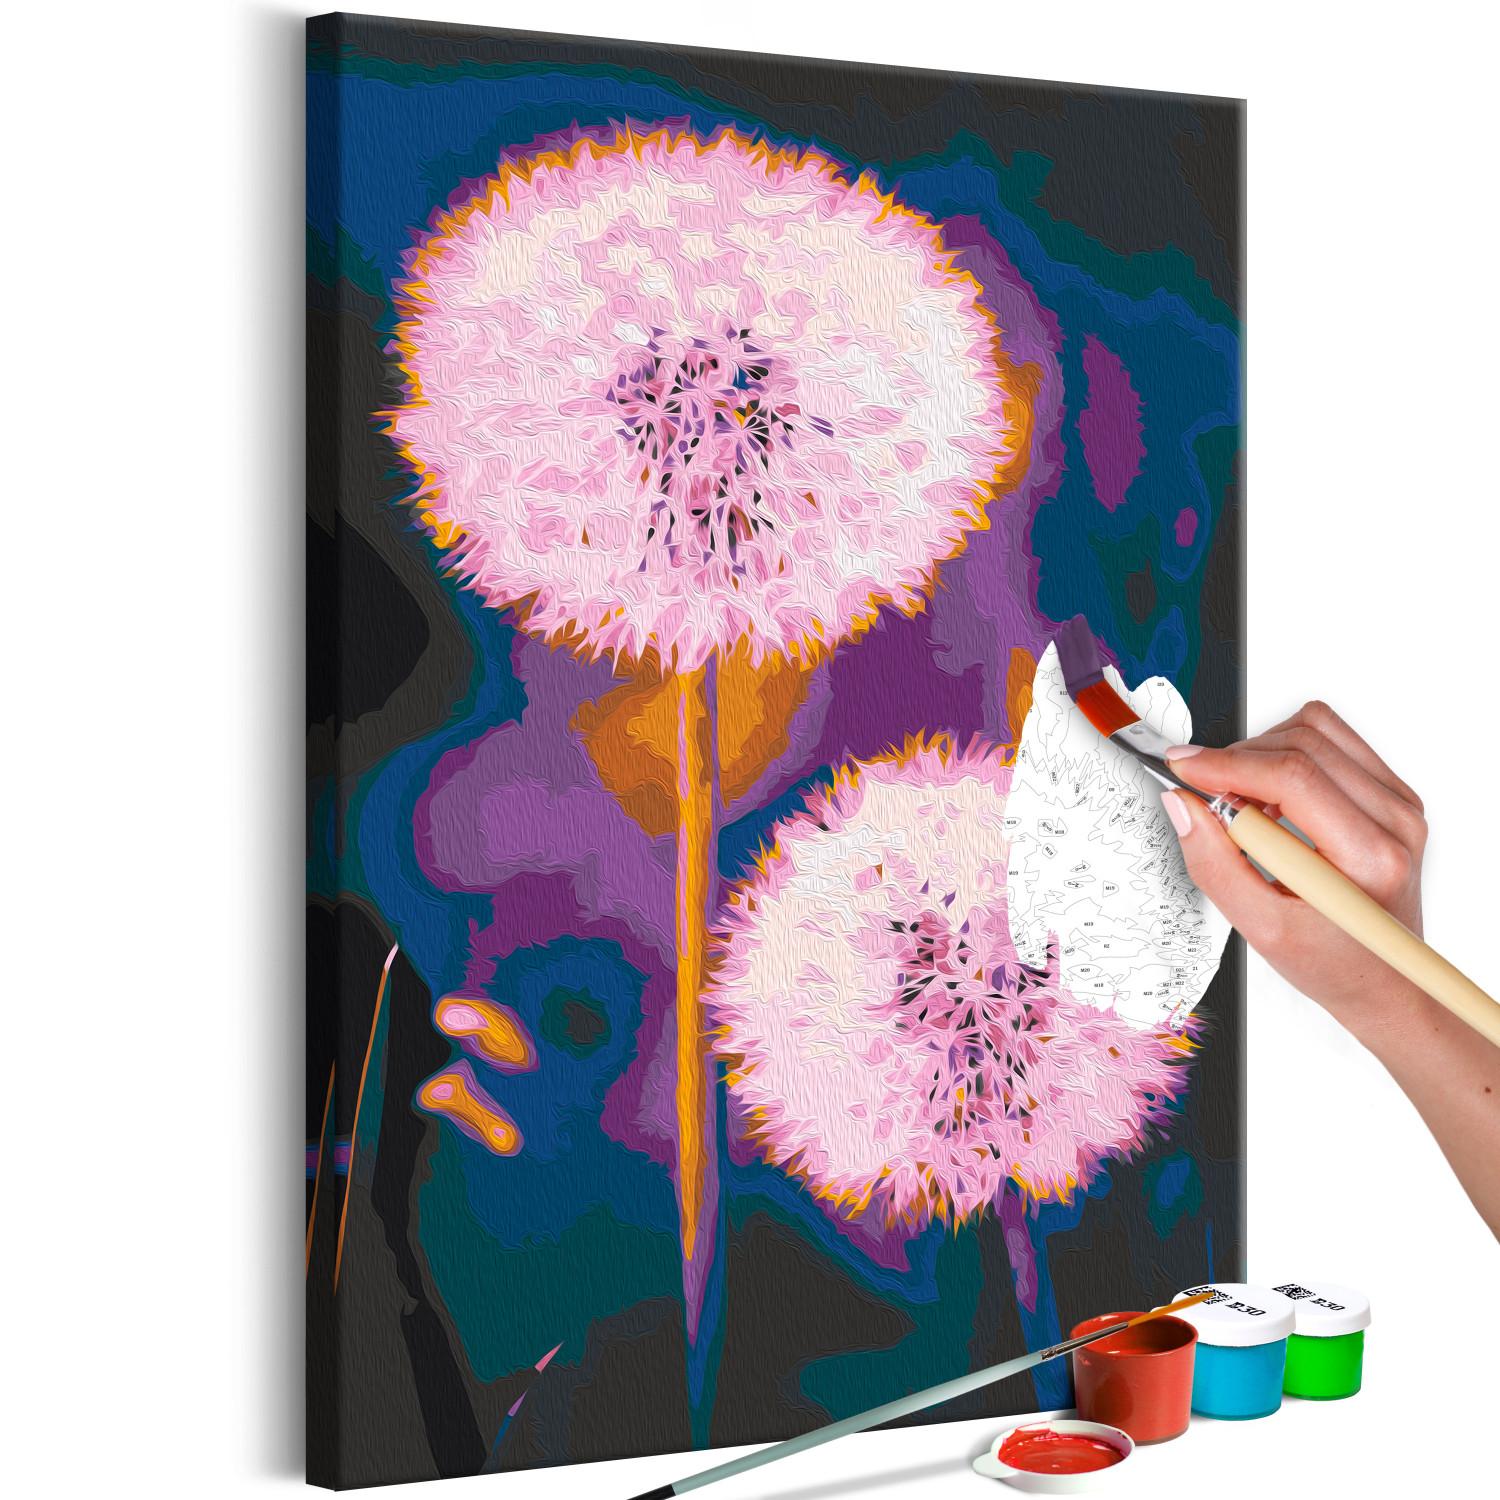 Paint by Number Kit Fluffy Balls - Large Pink Dandelions on a Dark Two-Color Background